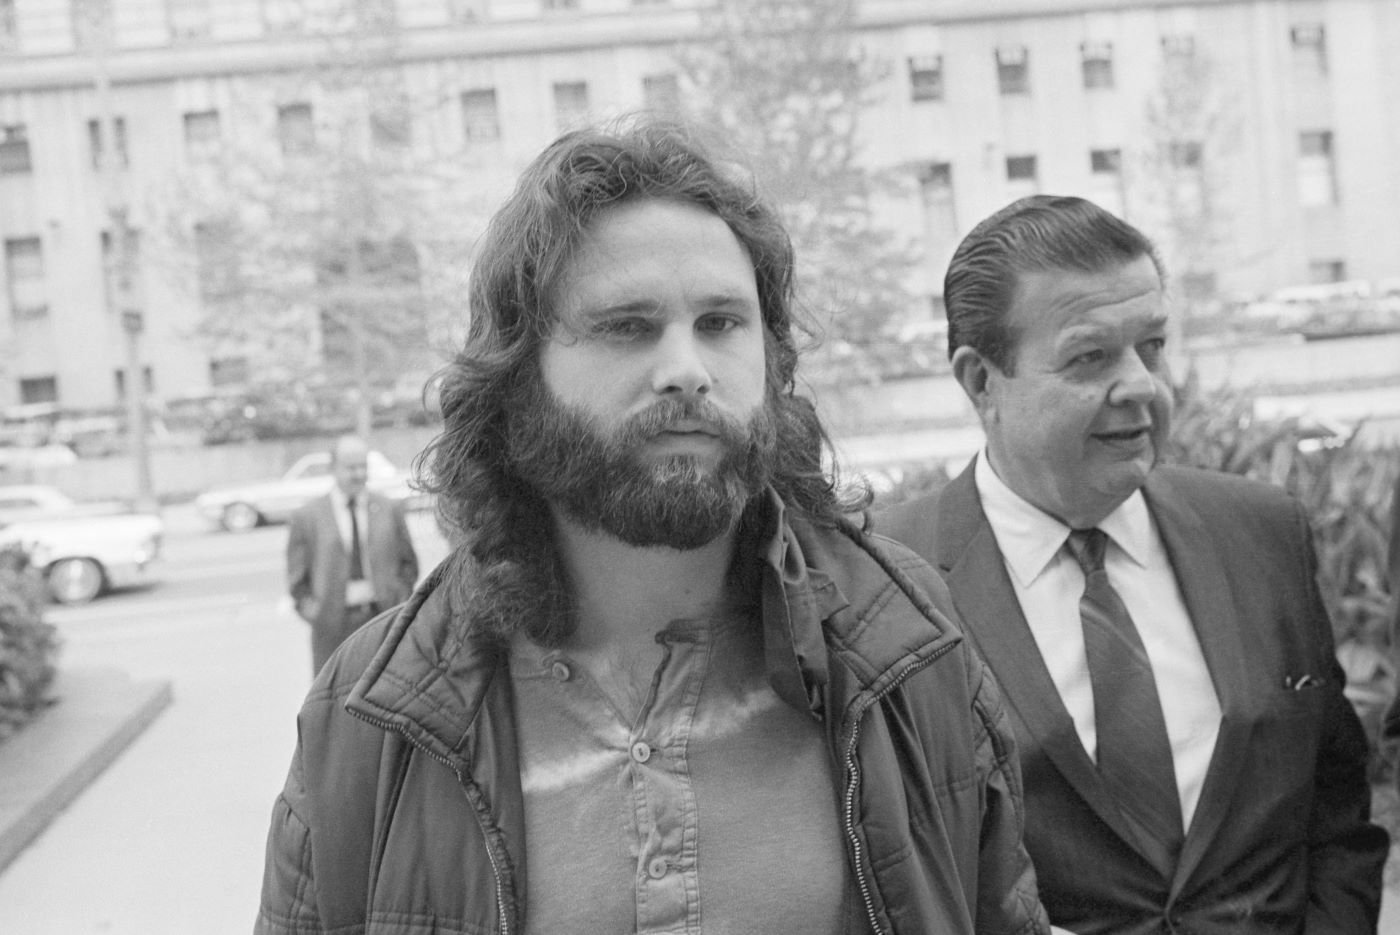 Jim Morrison, member of the 'Doors' standing in front of a building with many windows in a black and white picture.